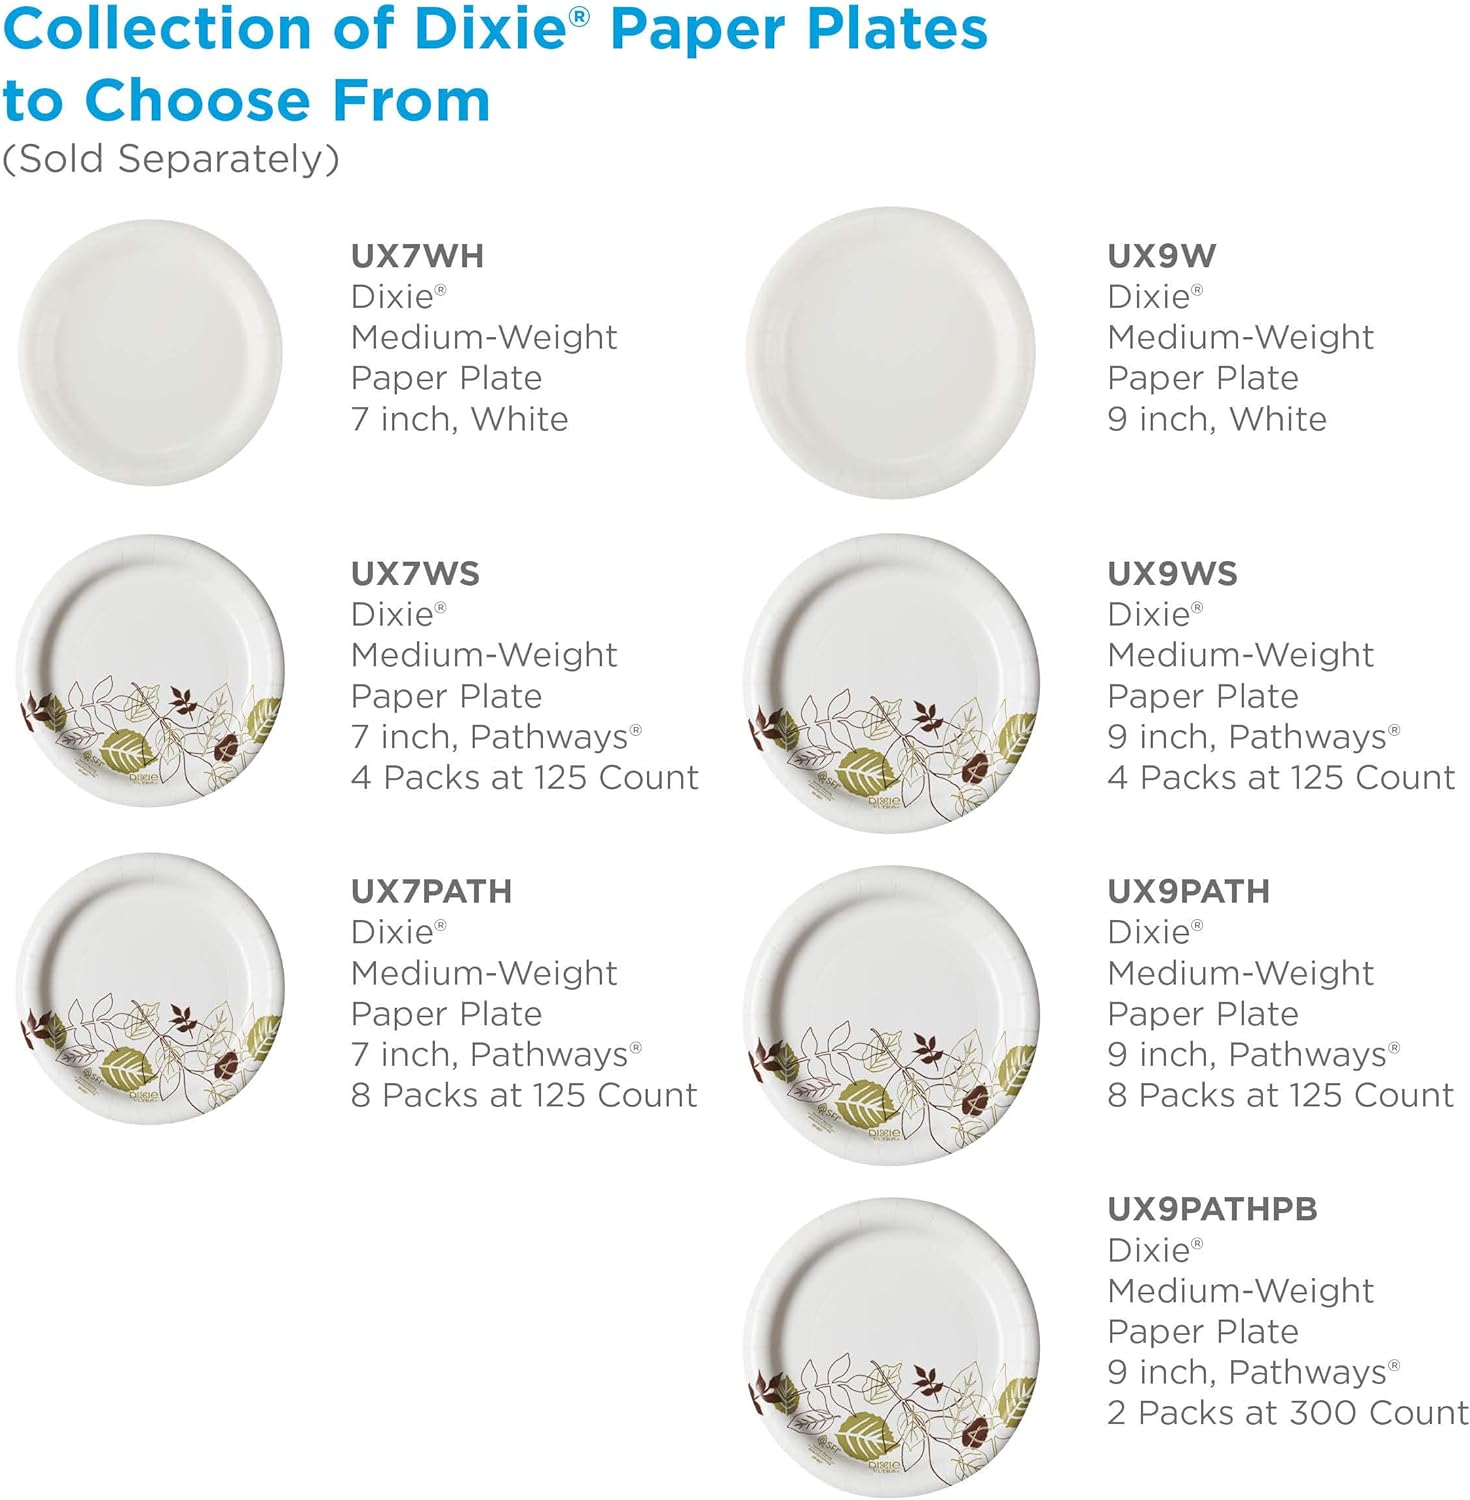 Dixie Ultra 6-7/8 Paper Plate, 300-count